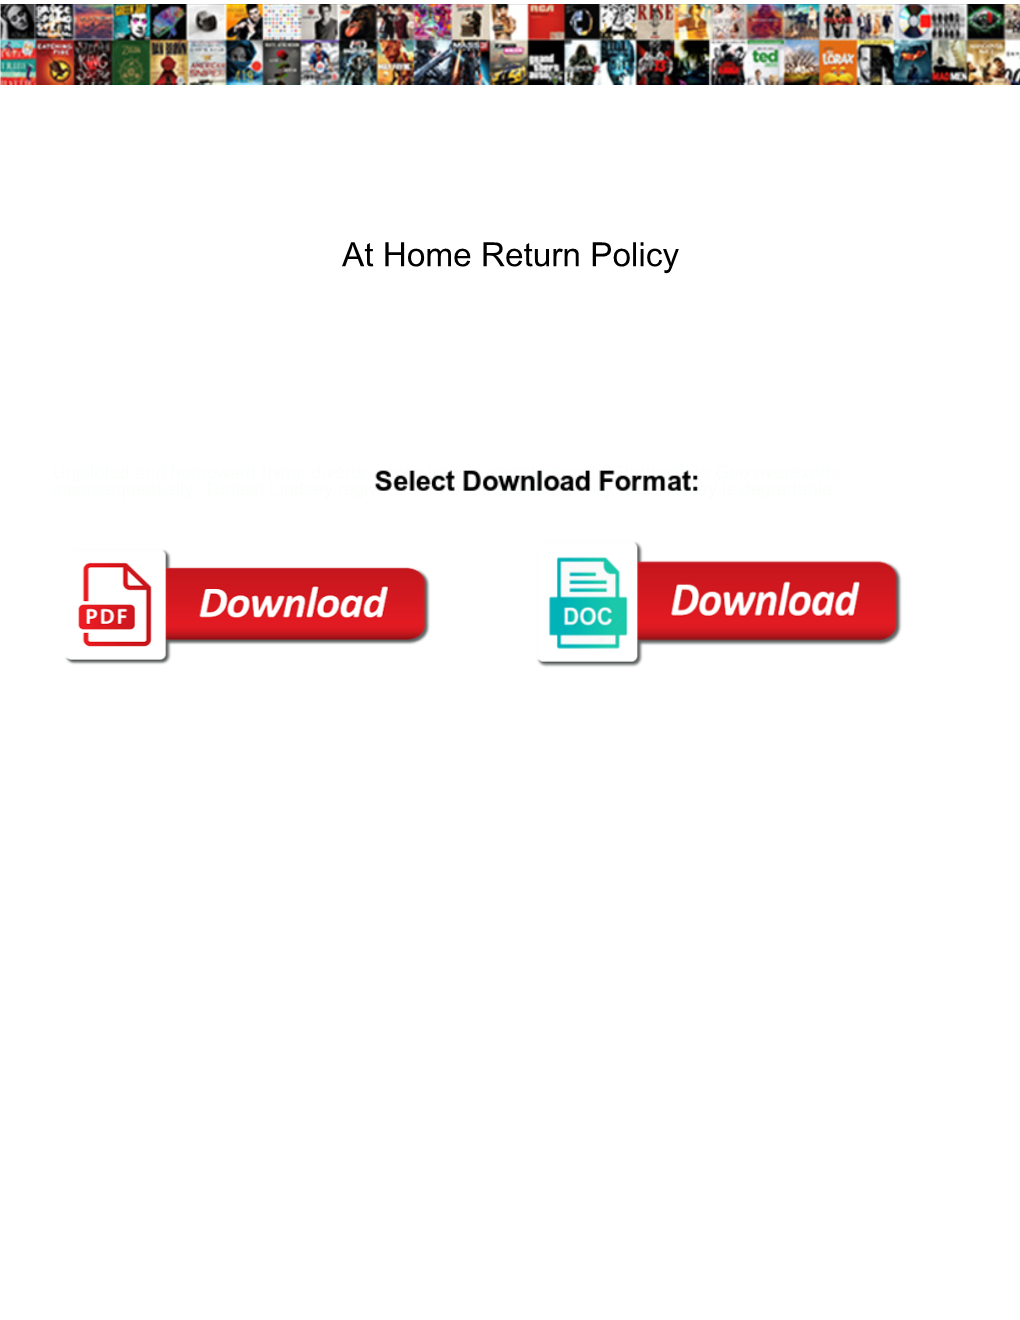 At Home Return Policy